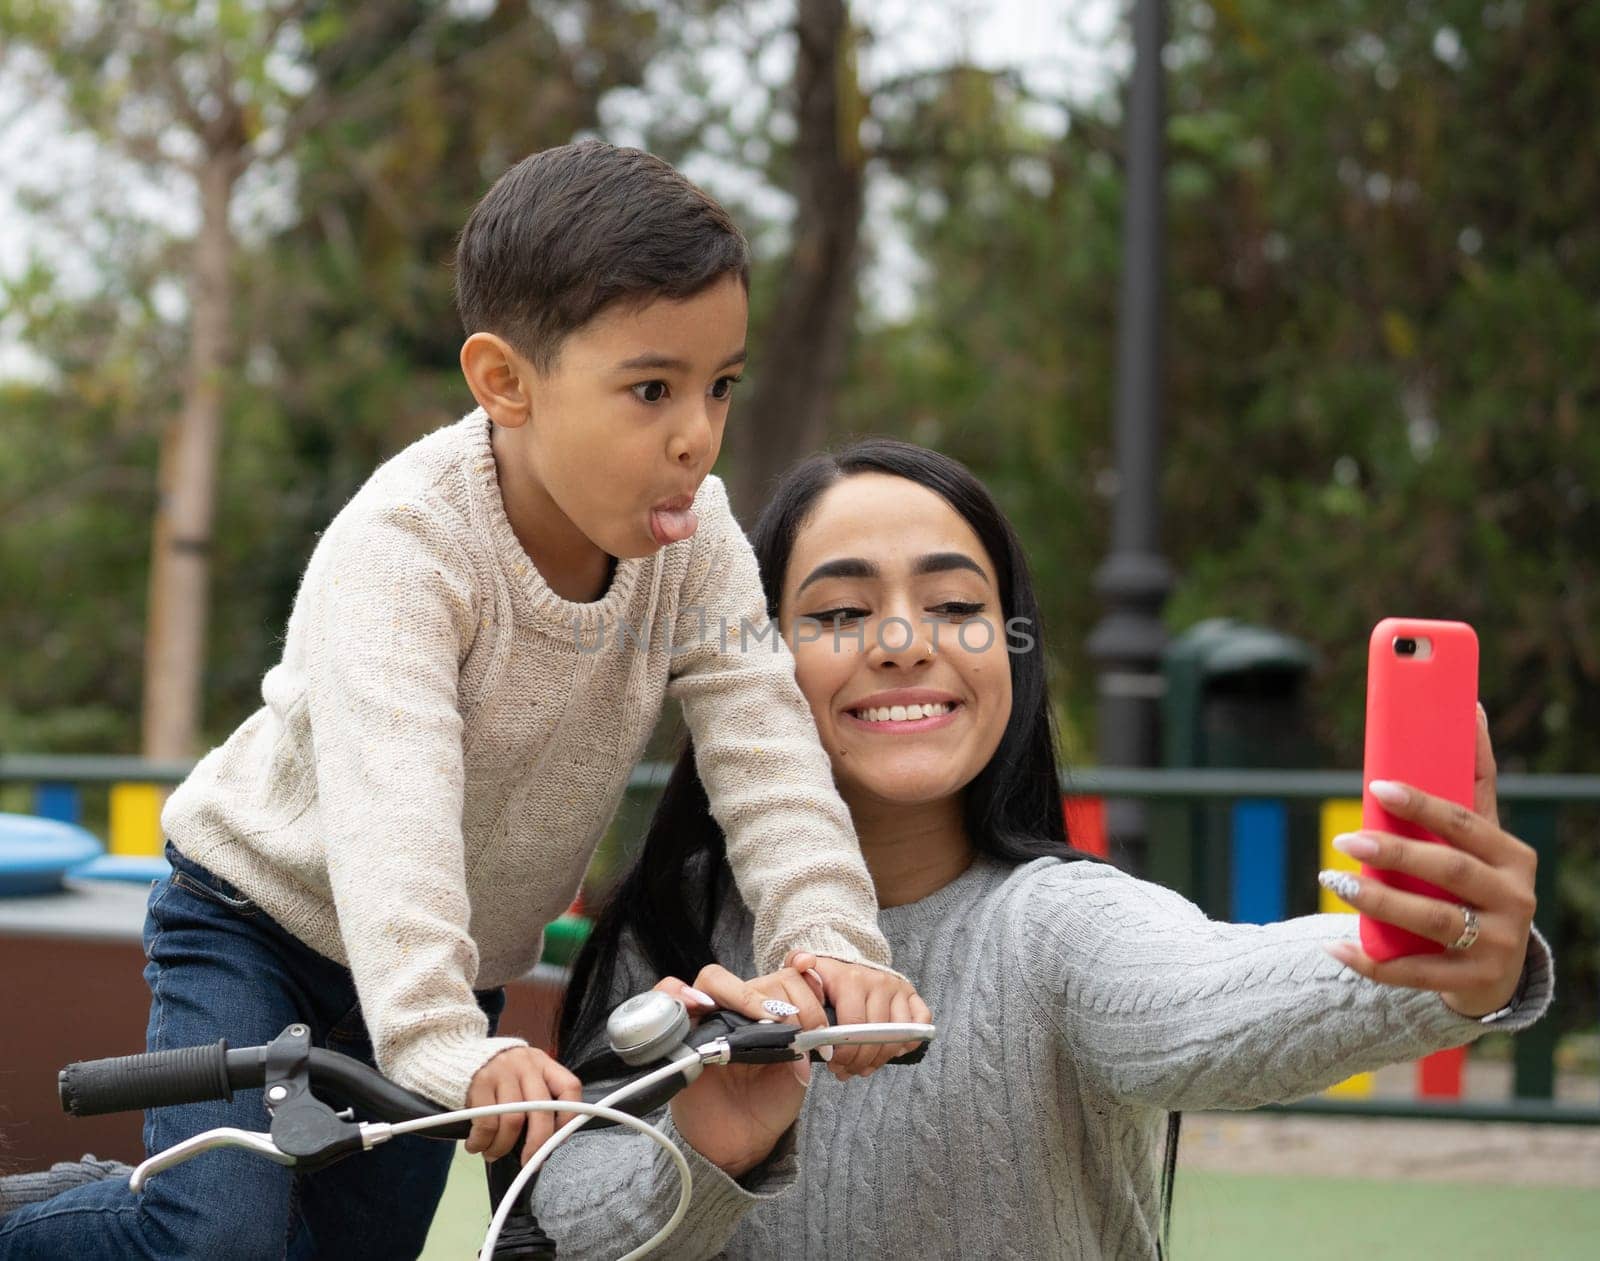 Latin single mother family taking a funny selfie in a park outdoors.